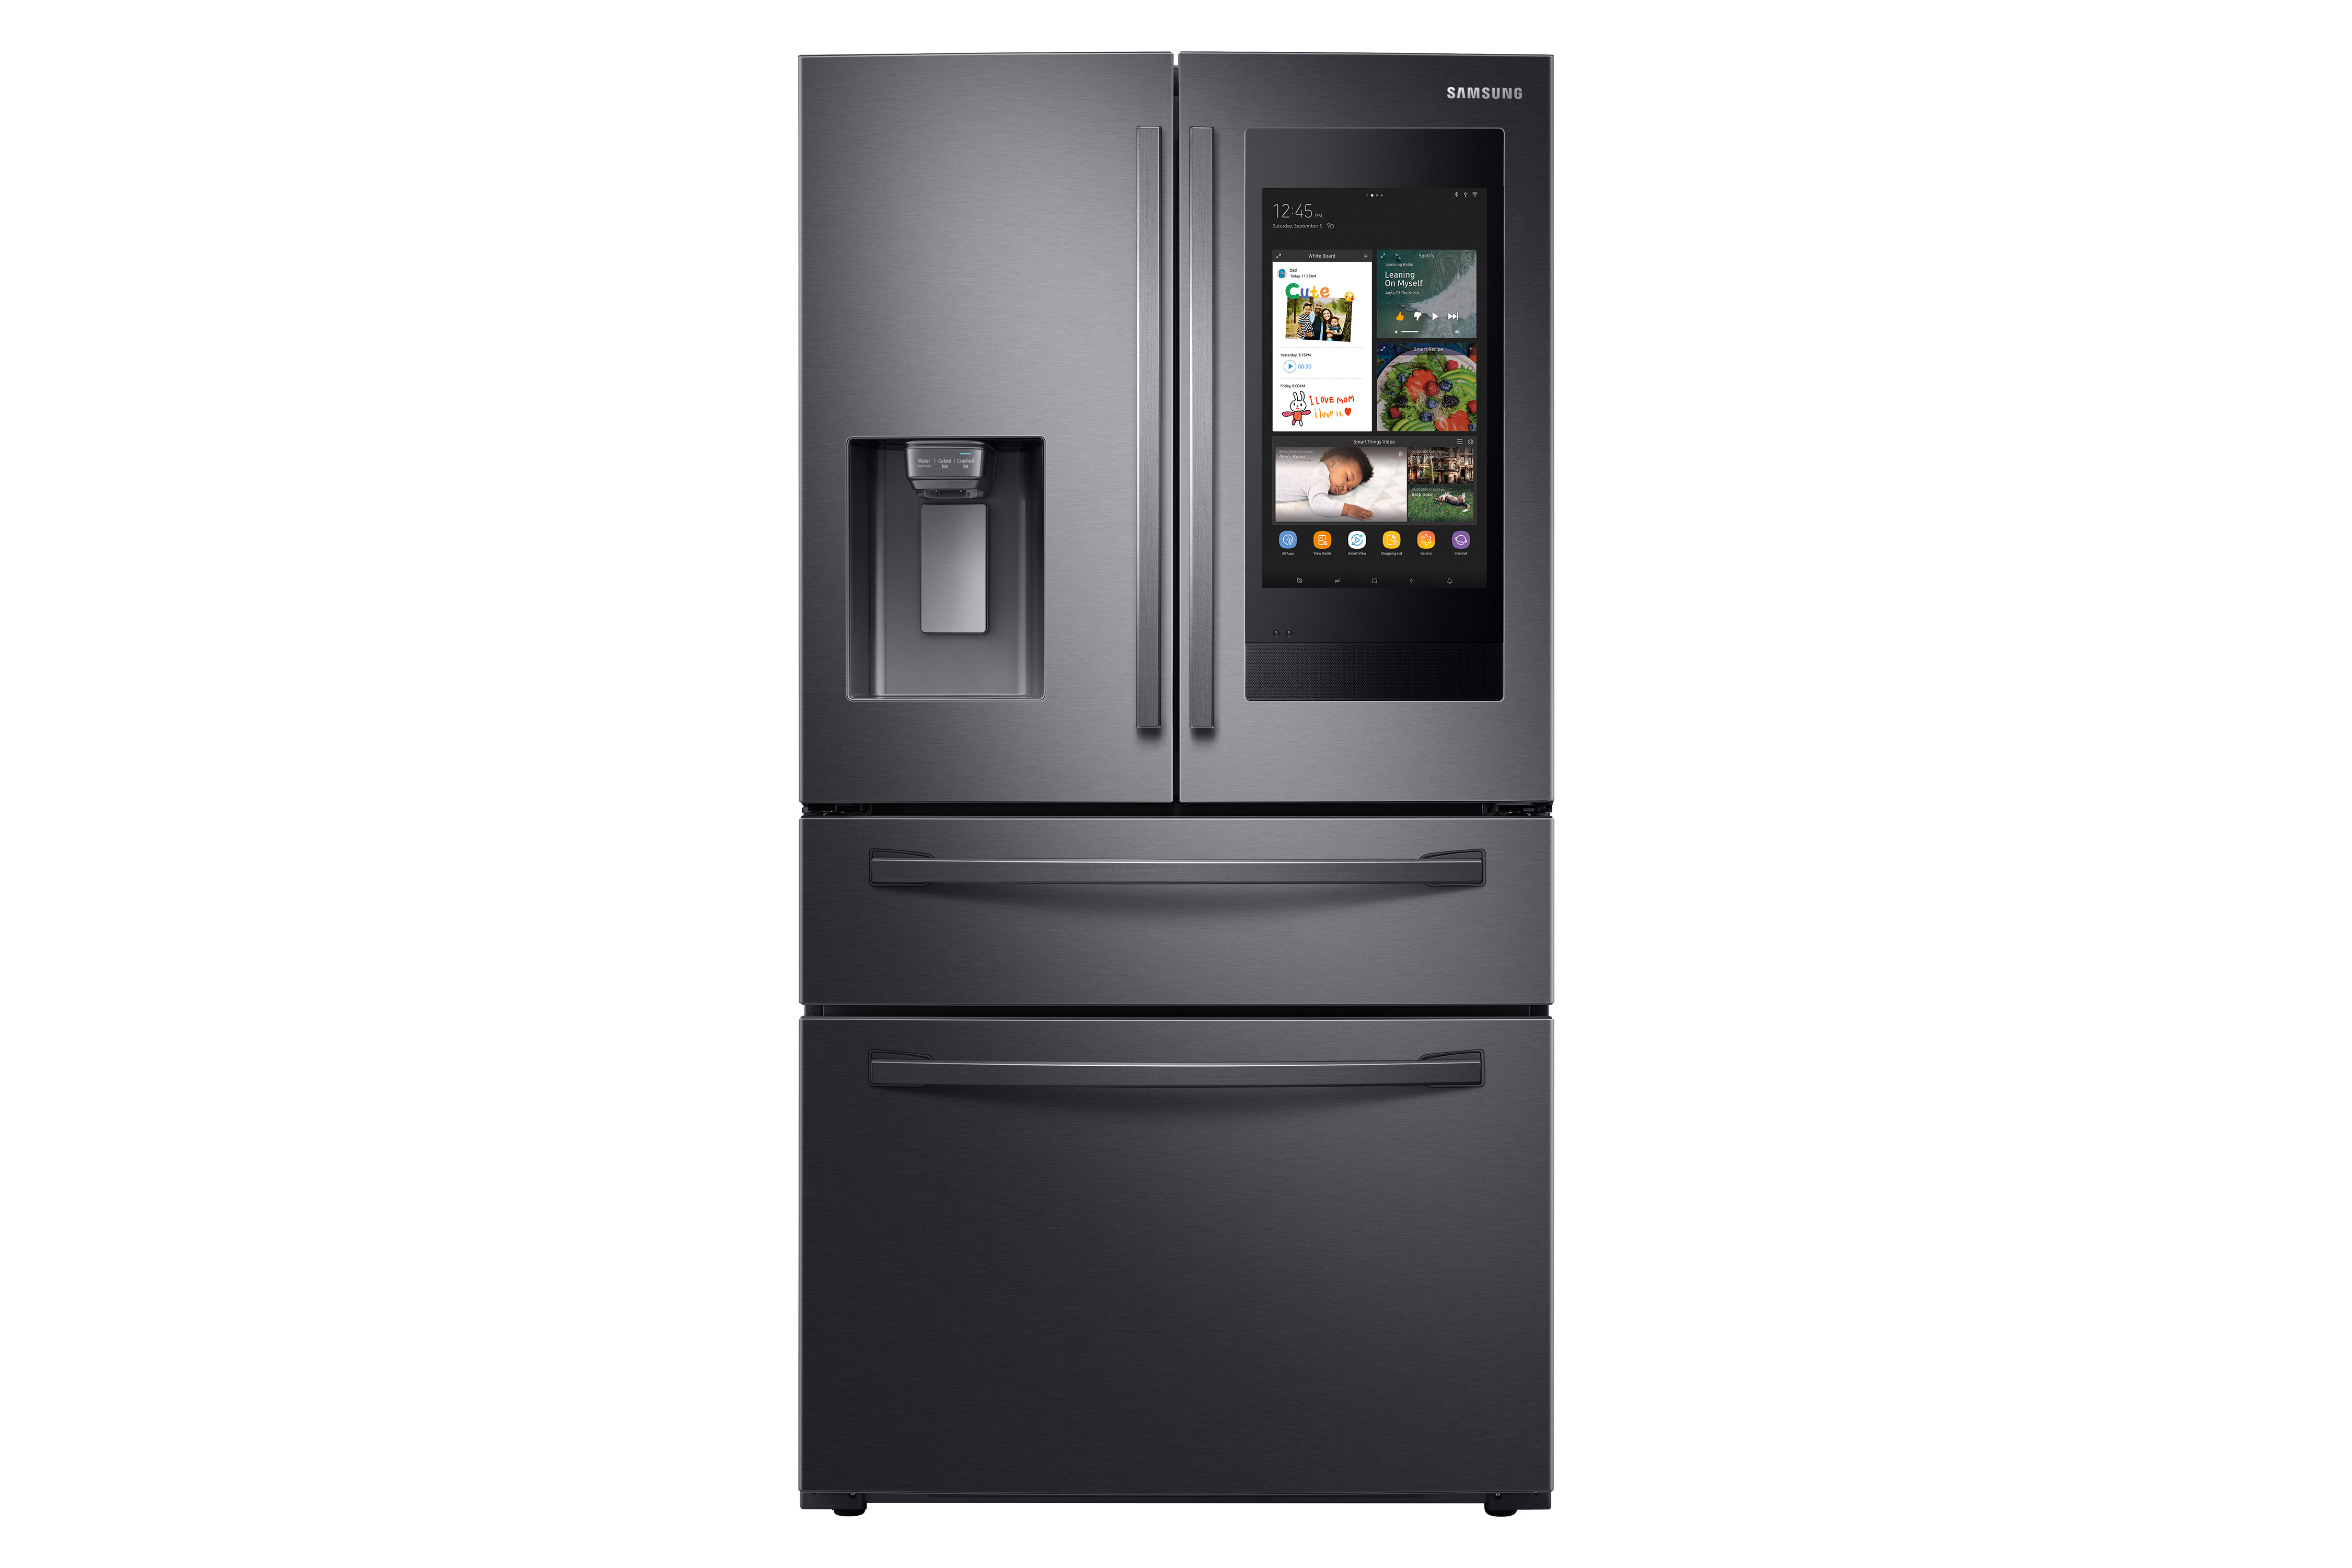 Samsung RF22R7551SG/AA 22cu.ft. French Door Counter Depth Refrigerator - Black Stainless Steel